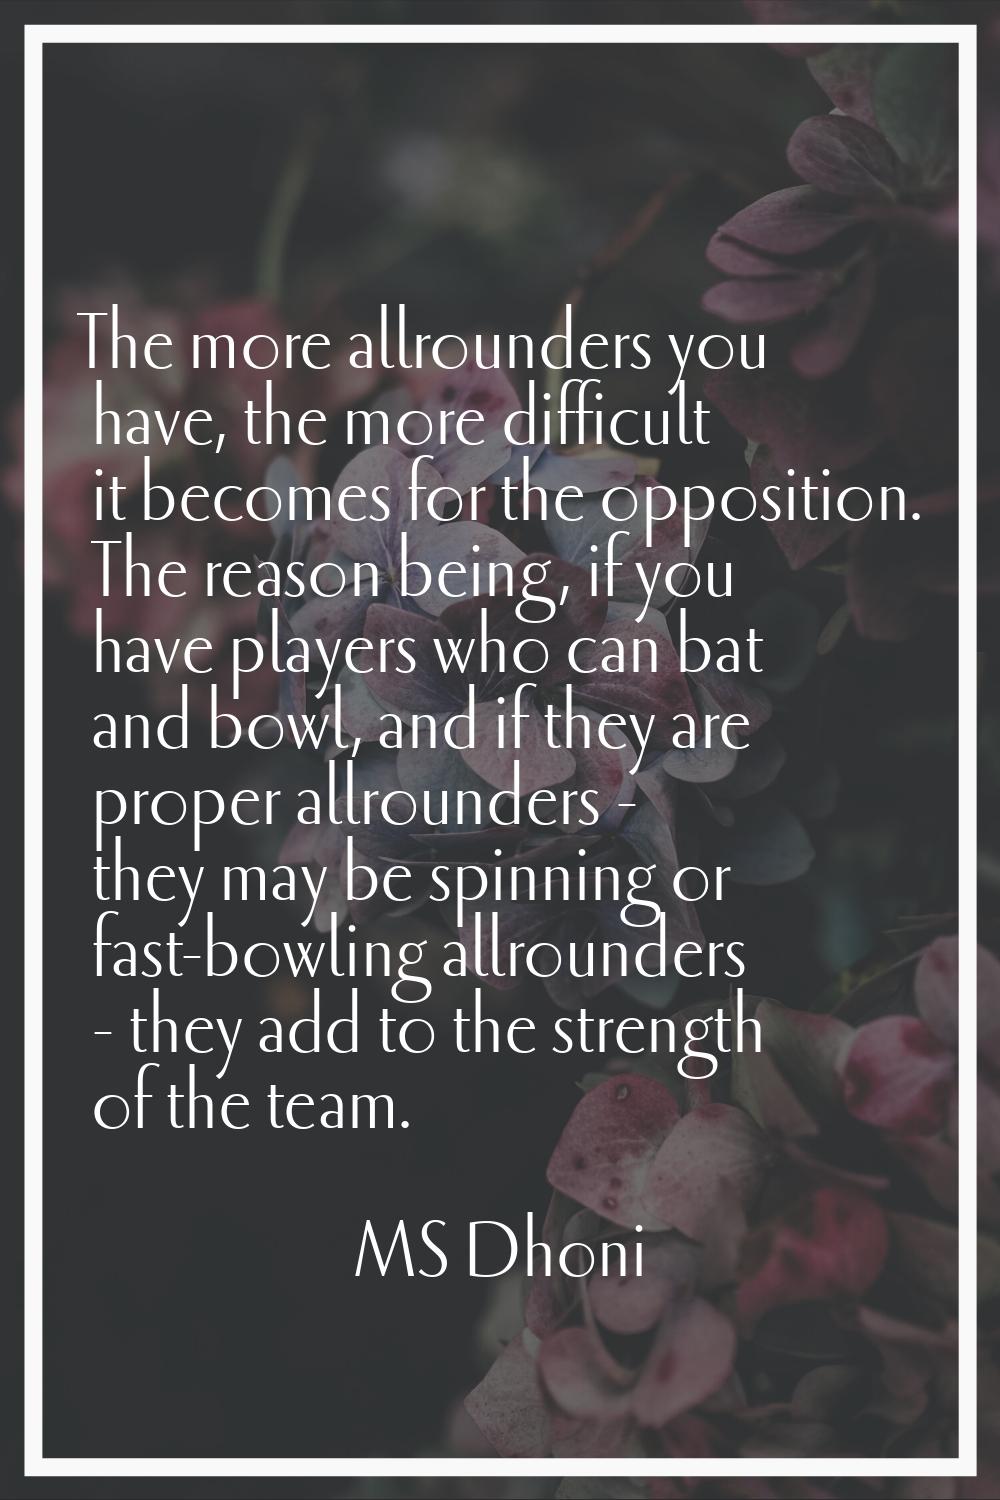 The more allrounders you have, the more difficult it becomes for the opposition. The reason being, 